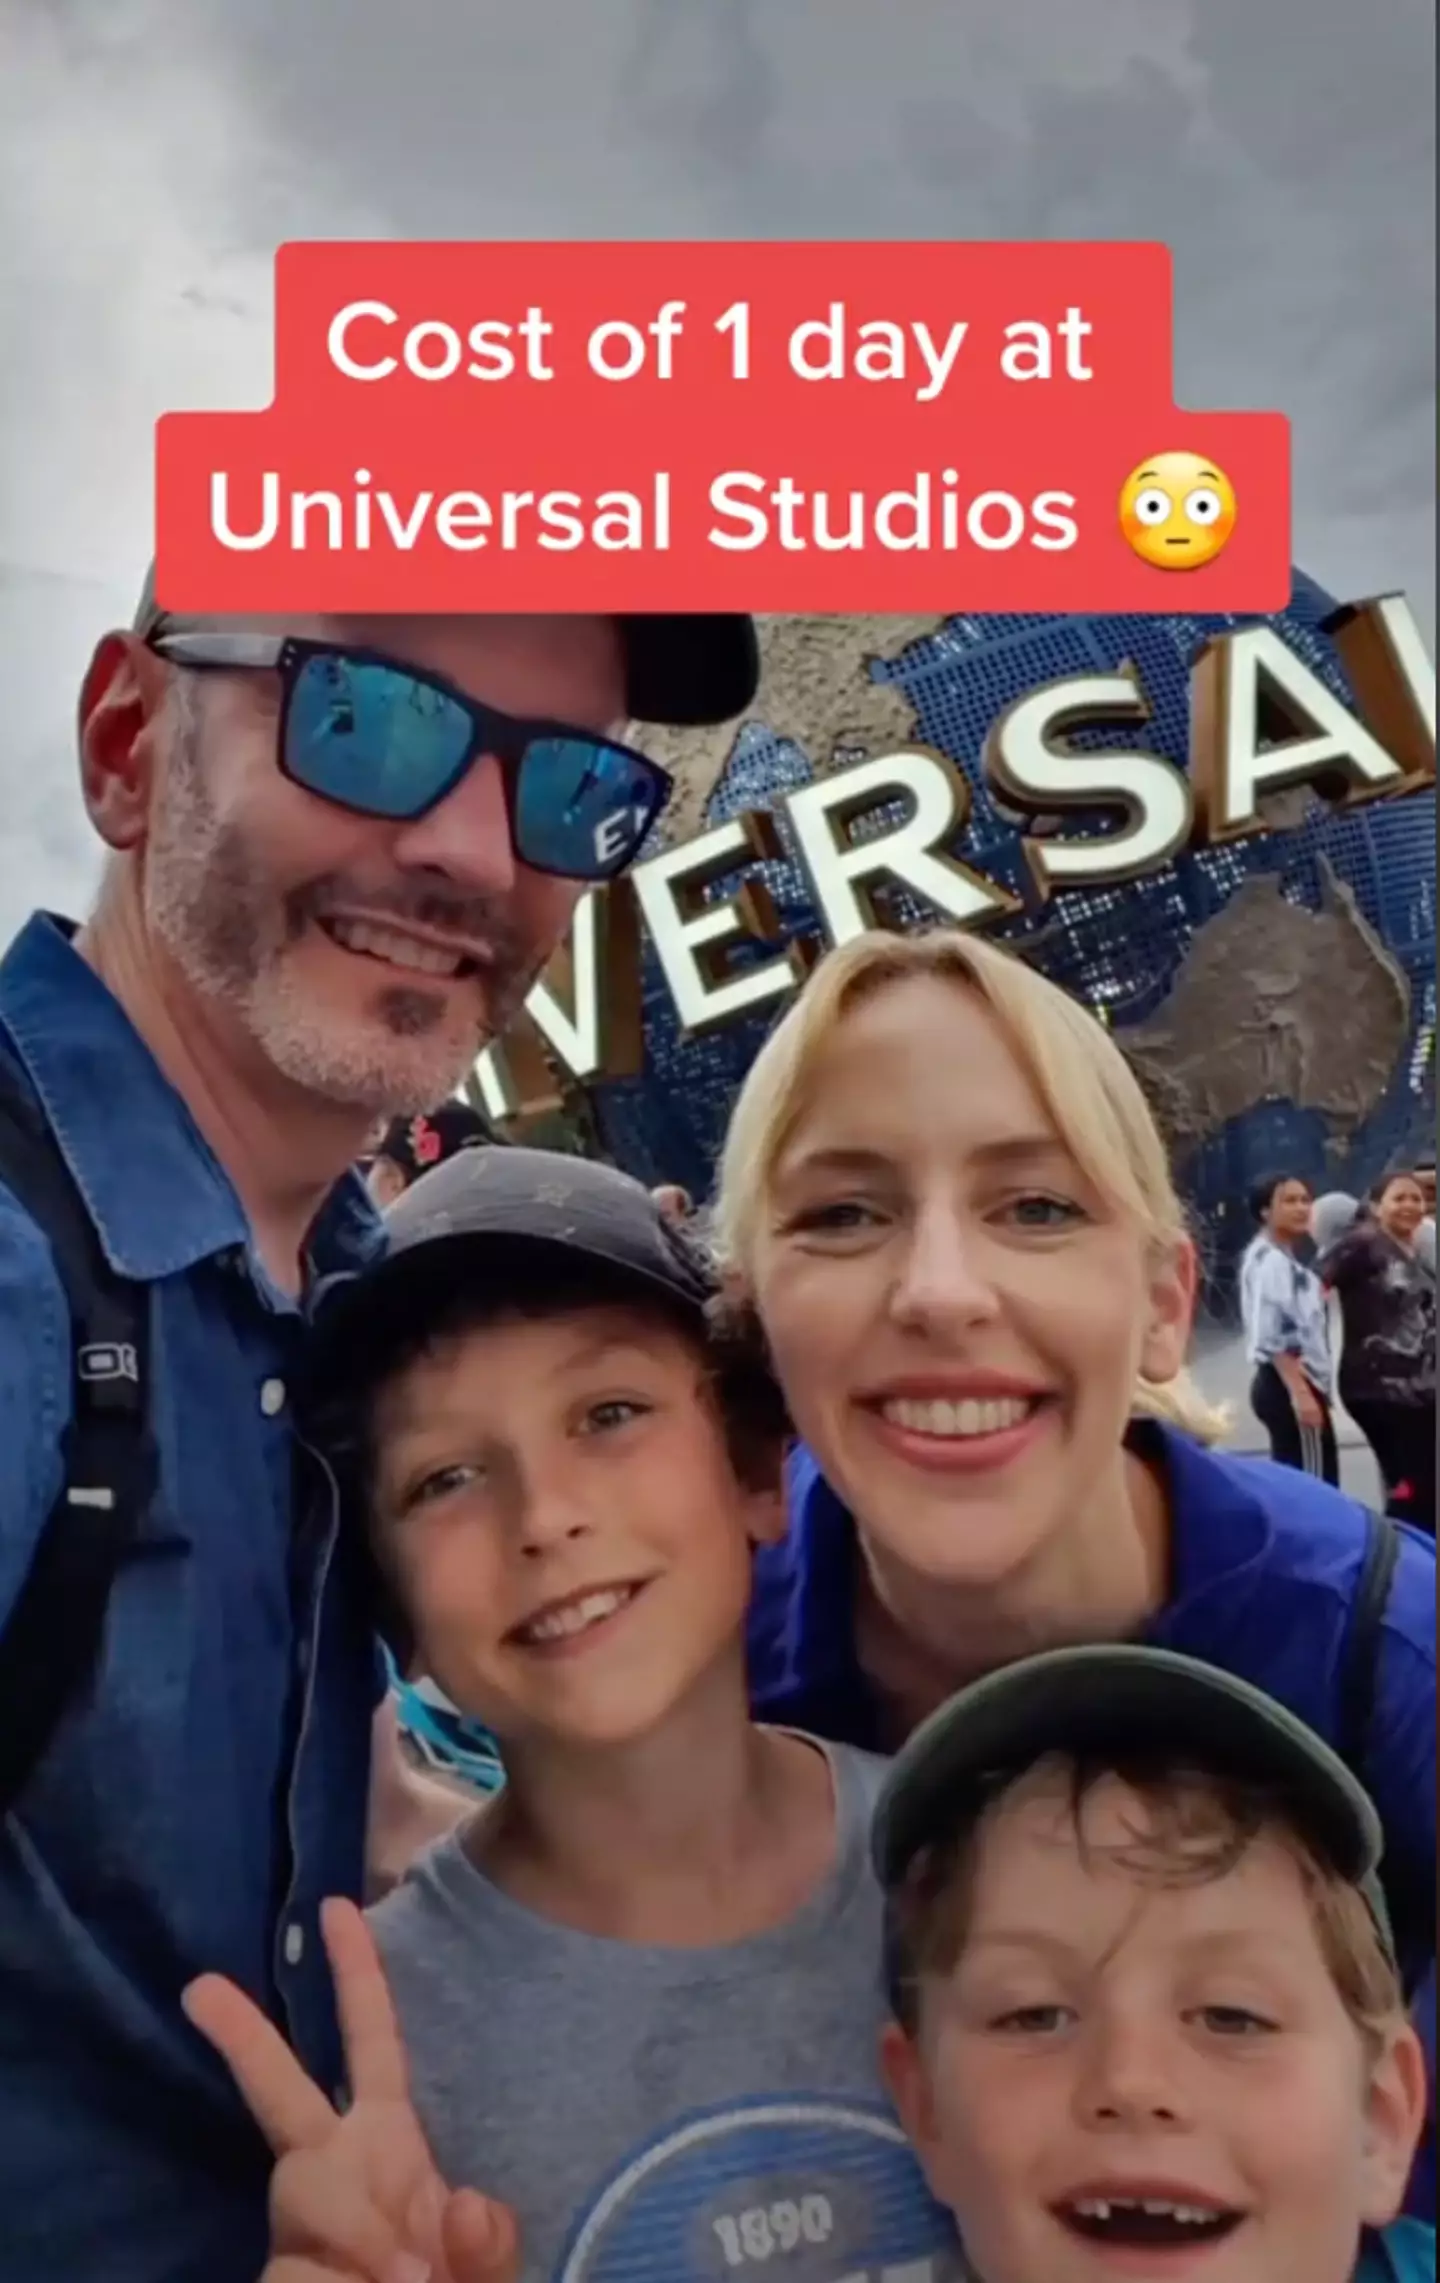 This family spent over $1,000 on just one day at Universal Studios.